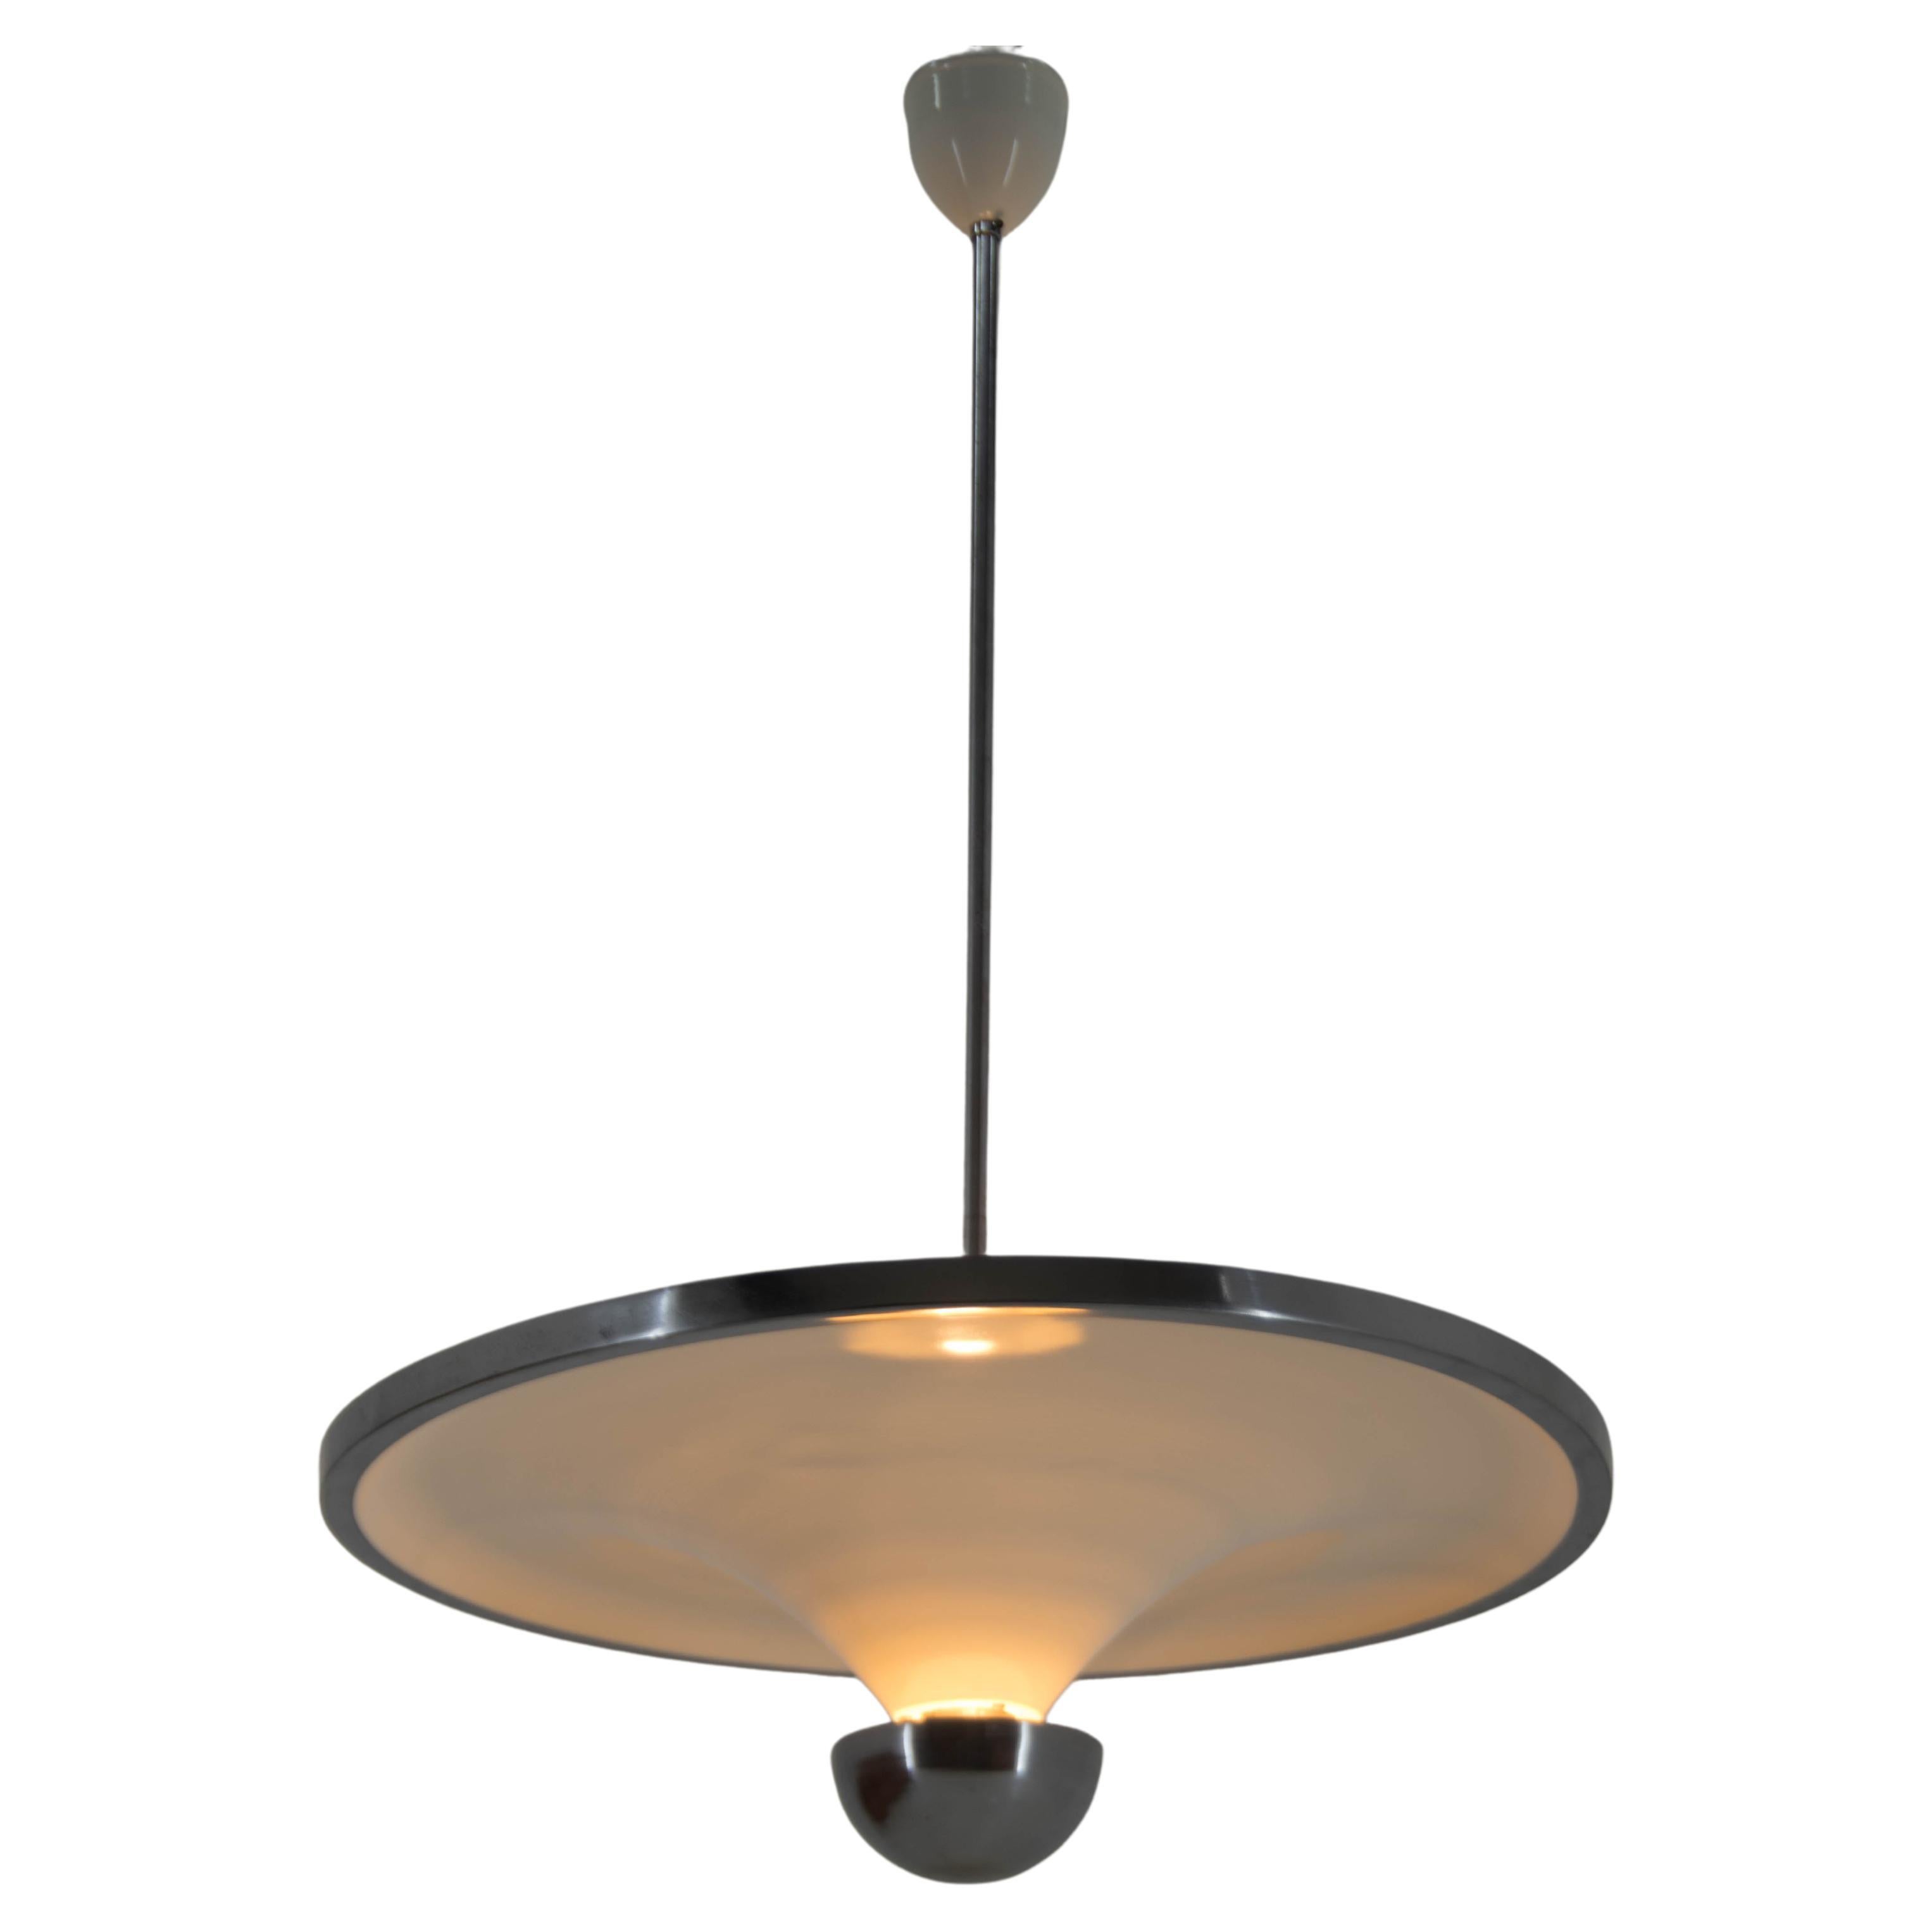 Rare Bauhaus Chandelier with Indirect Light by IAS, 1920s For Sale